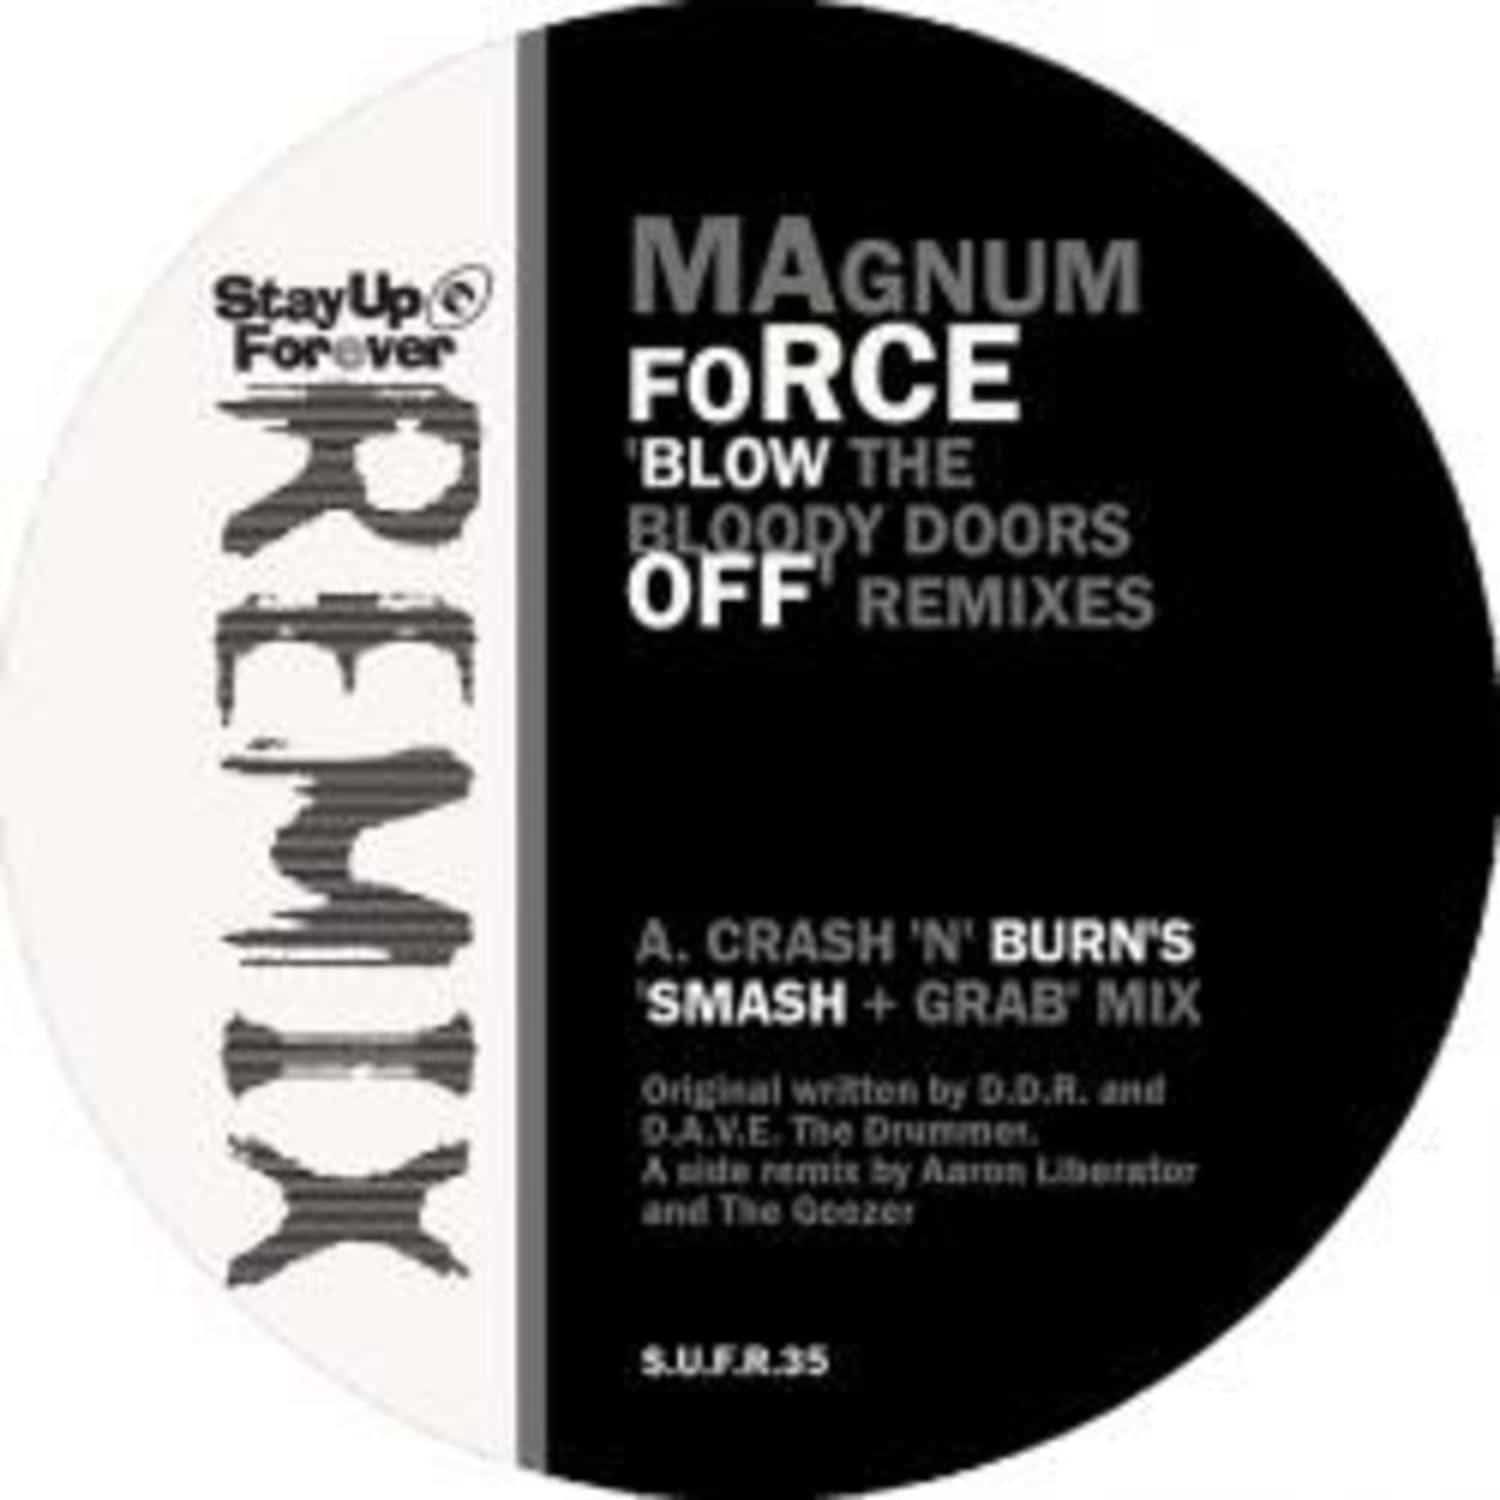 Magnum Force - BLOW THE BLOODY DOORS OFF